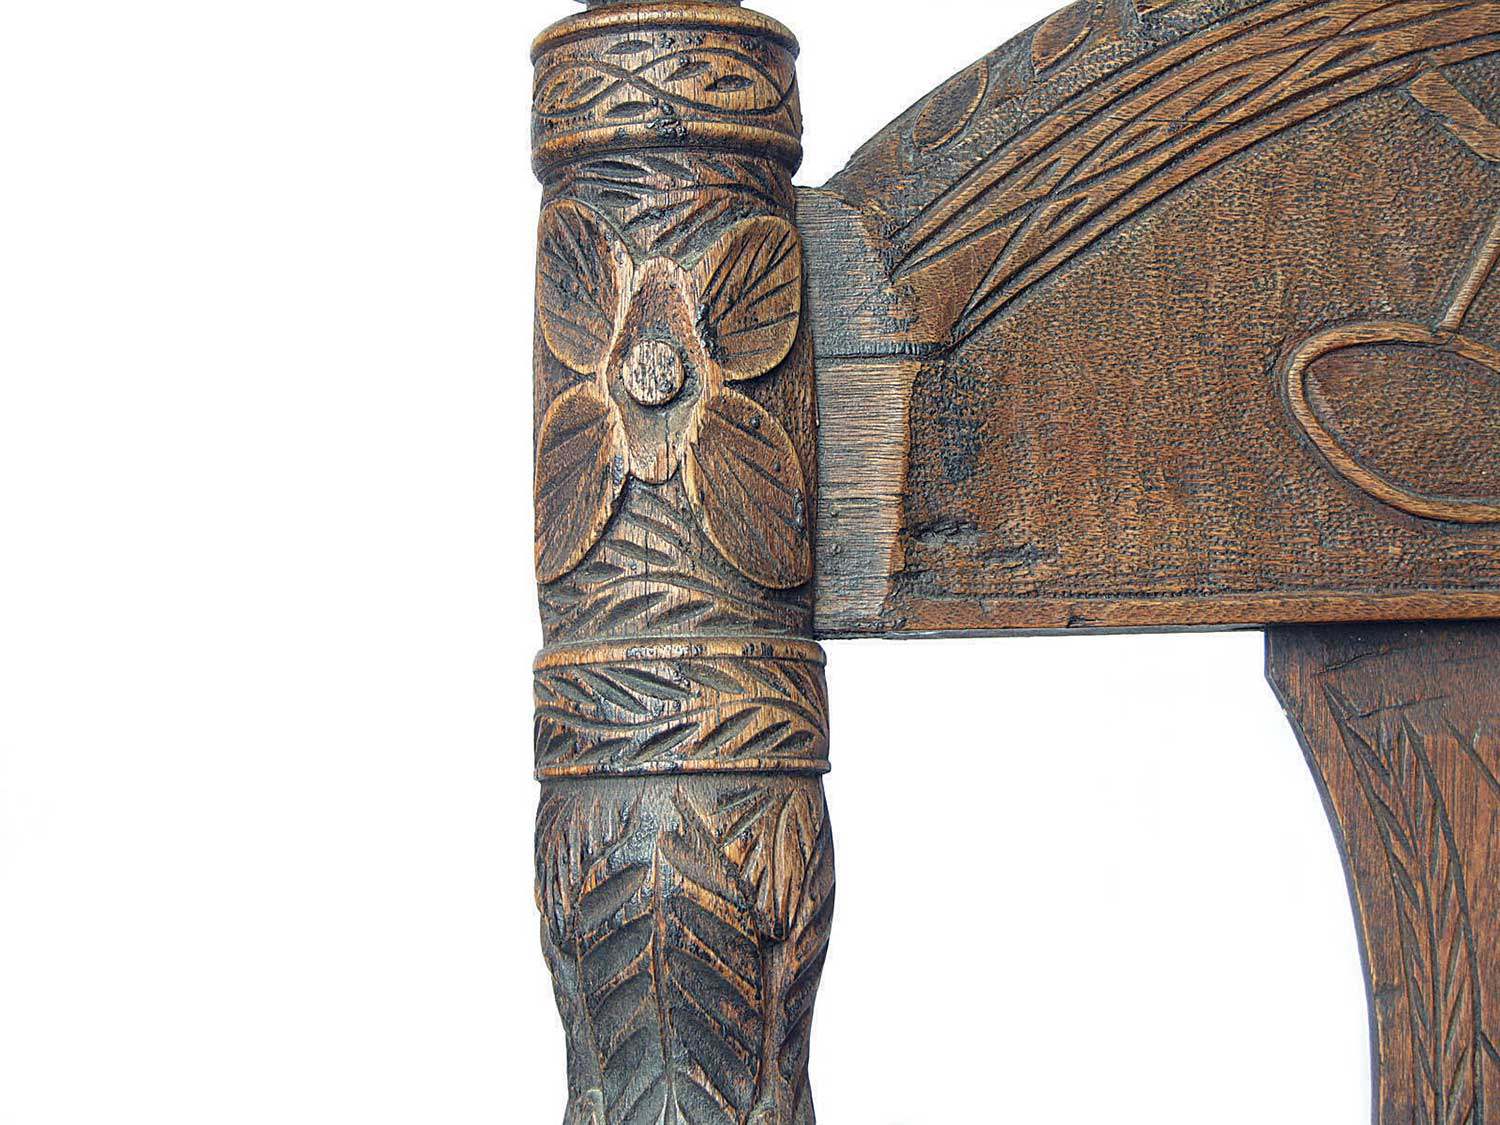 Carved walnut chairs on display at the Josiah Henson Museum of African-Canadian History (detail).